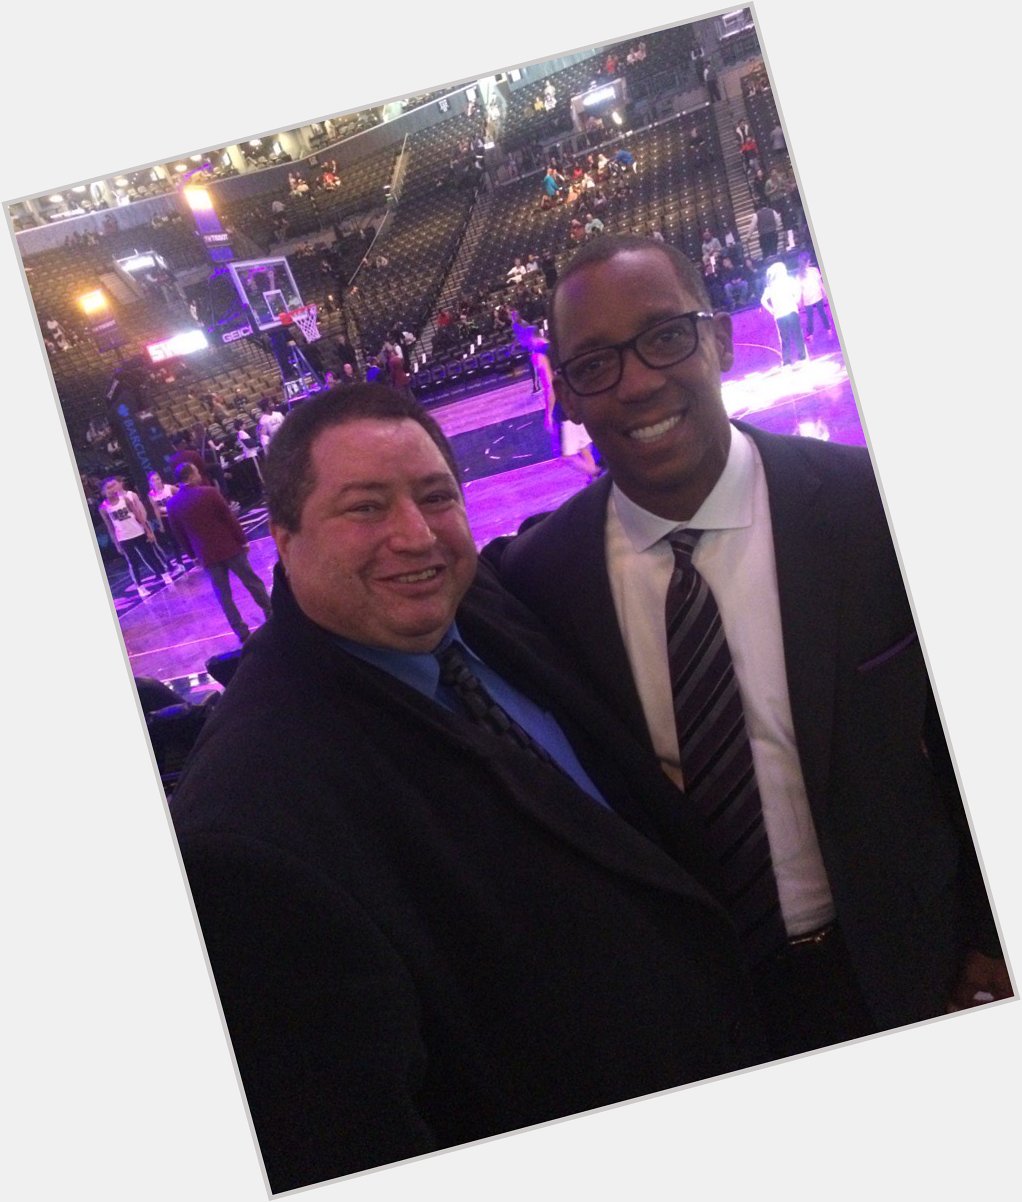 HAPPY BIRTHDAY SHOUT OUT TO SEAN ELLIOTT.. ONE OF THE COOLEST DUDES ON THE PLANET  